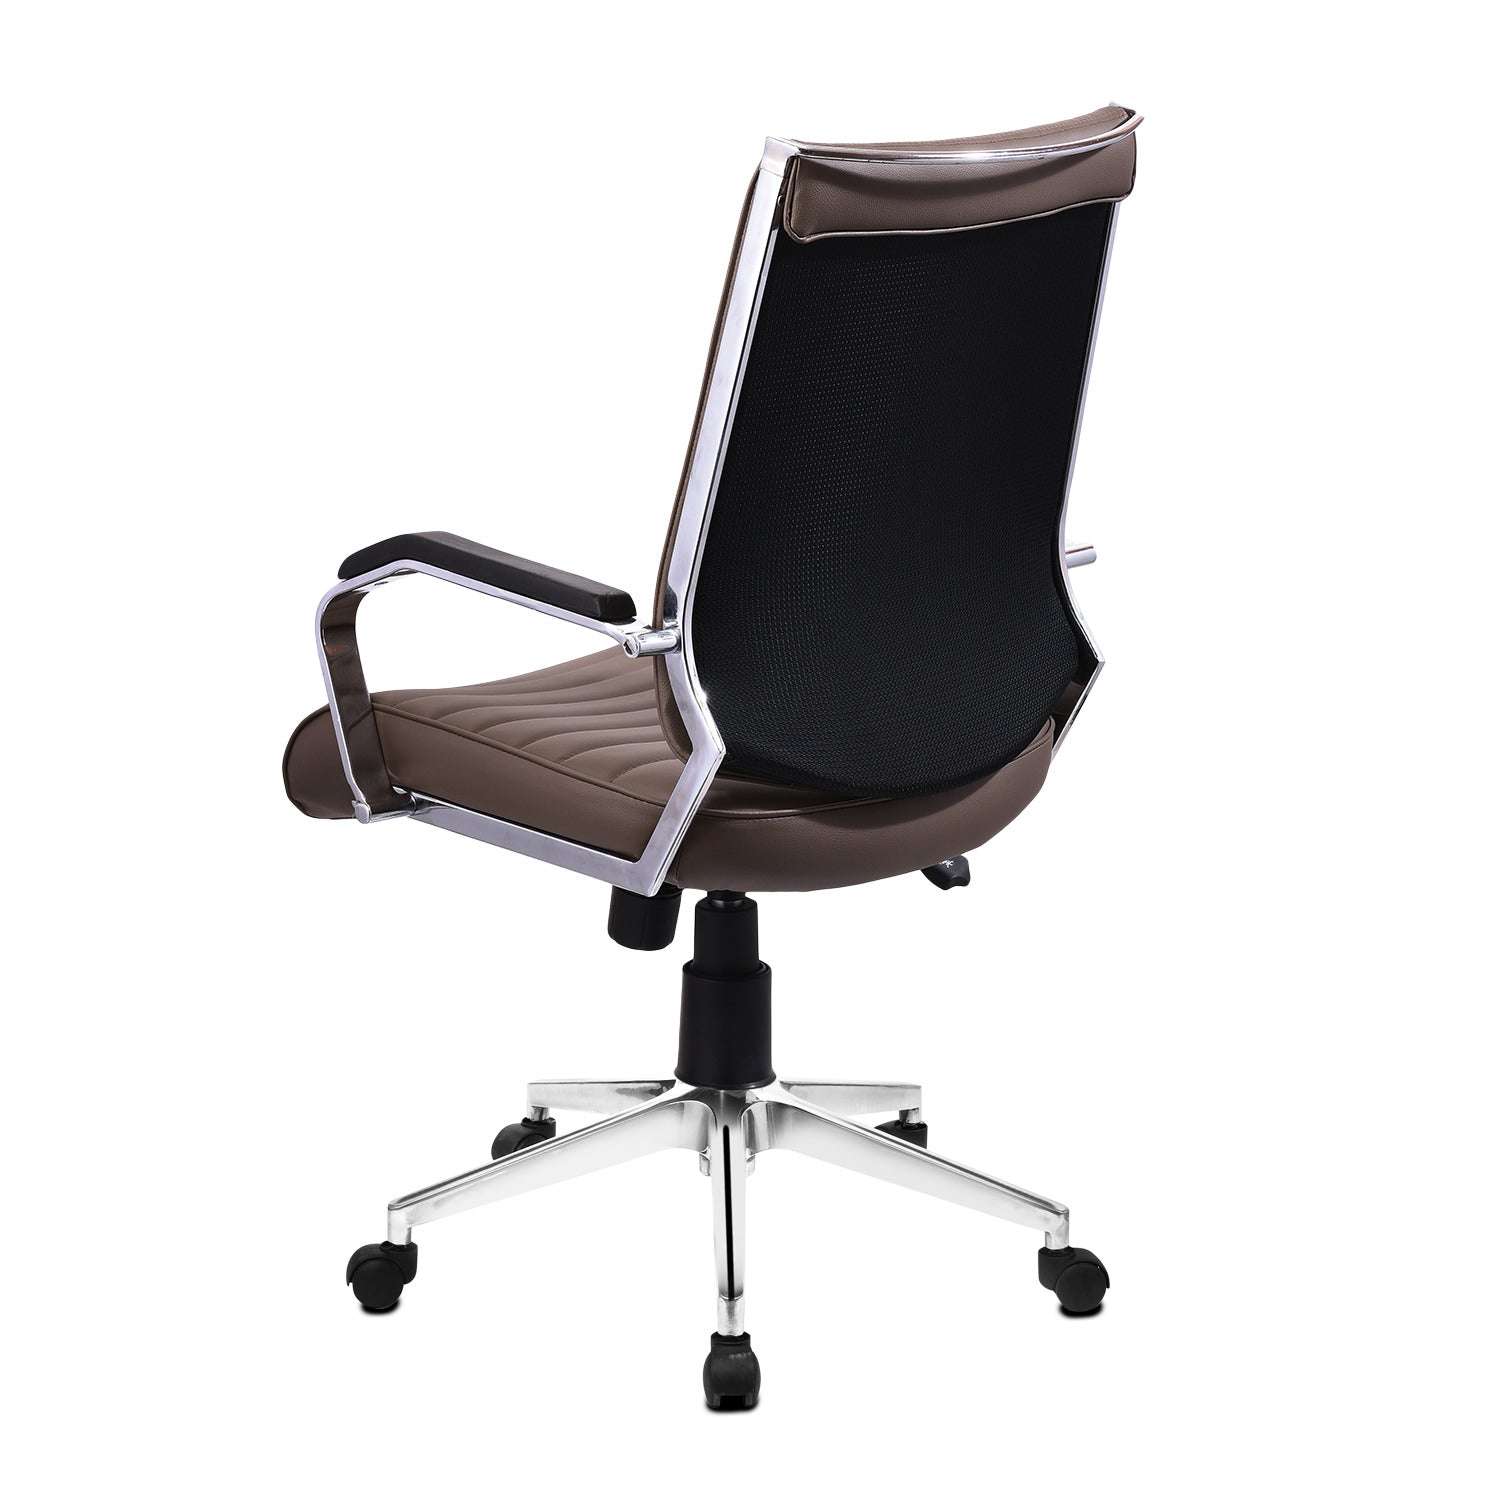 ZFD1018 Medium Back Chair by Zorin in Brown Color Zorin